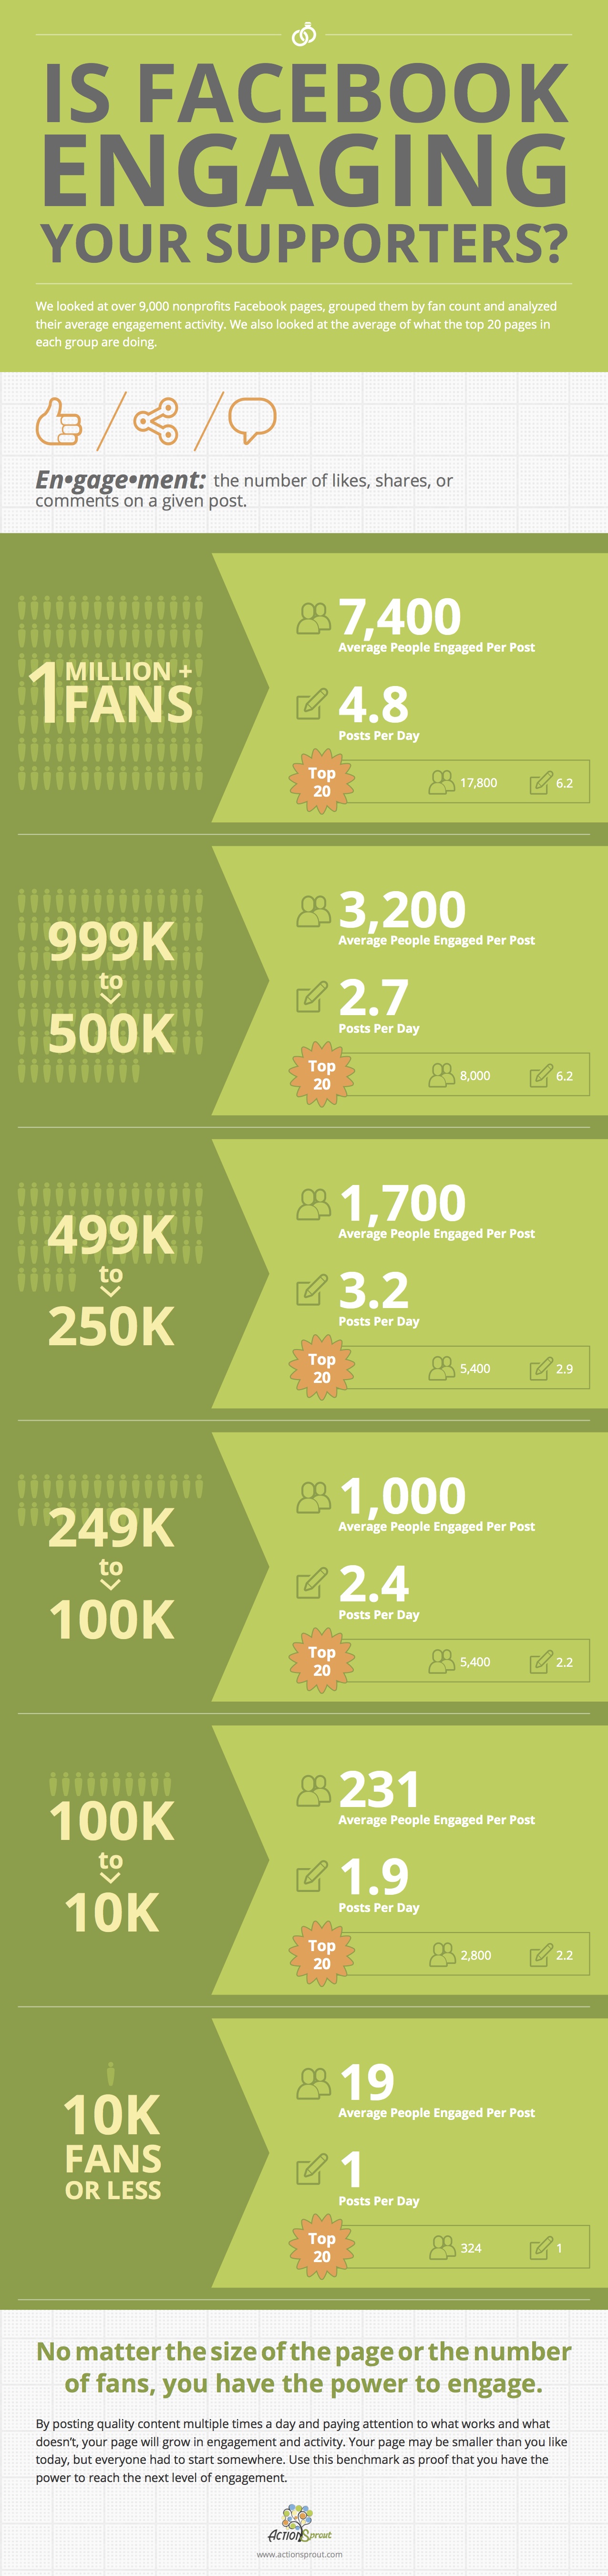 facebook-engagement-infographic